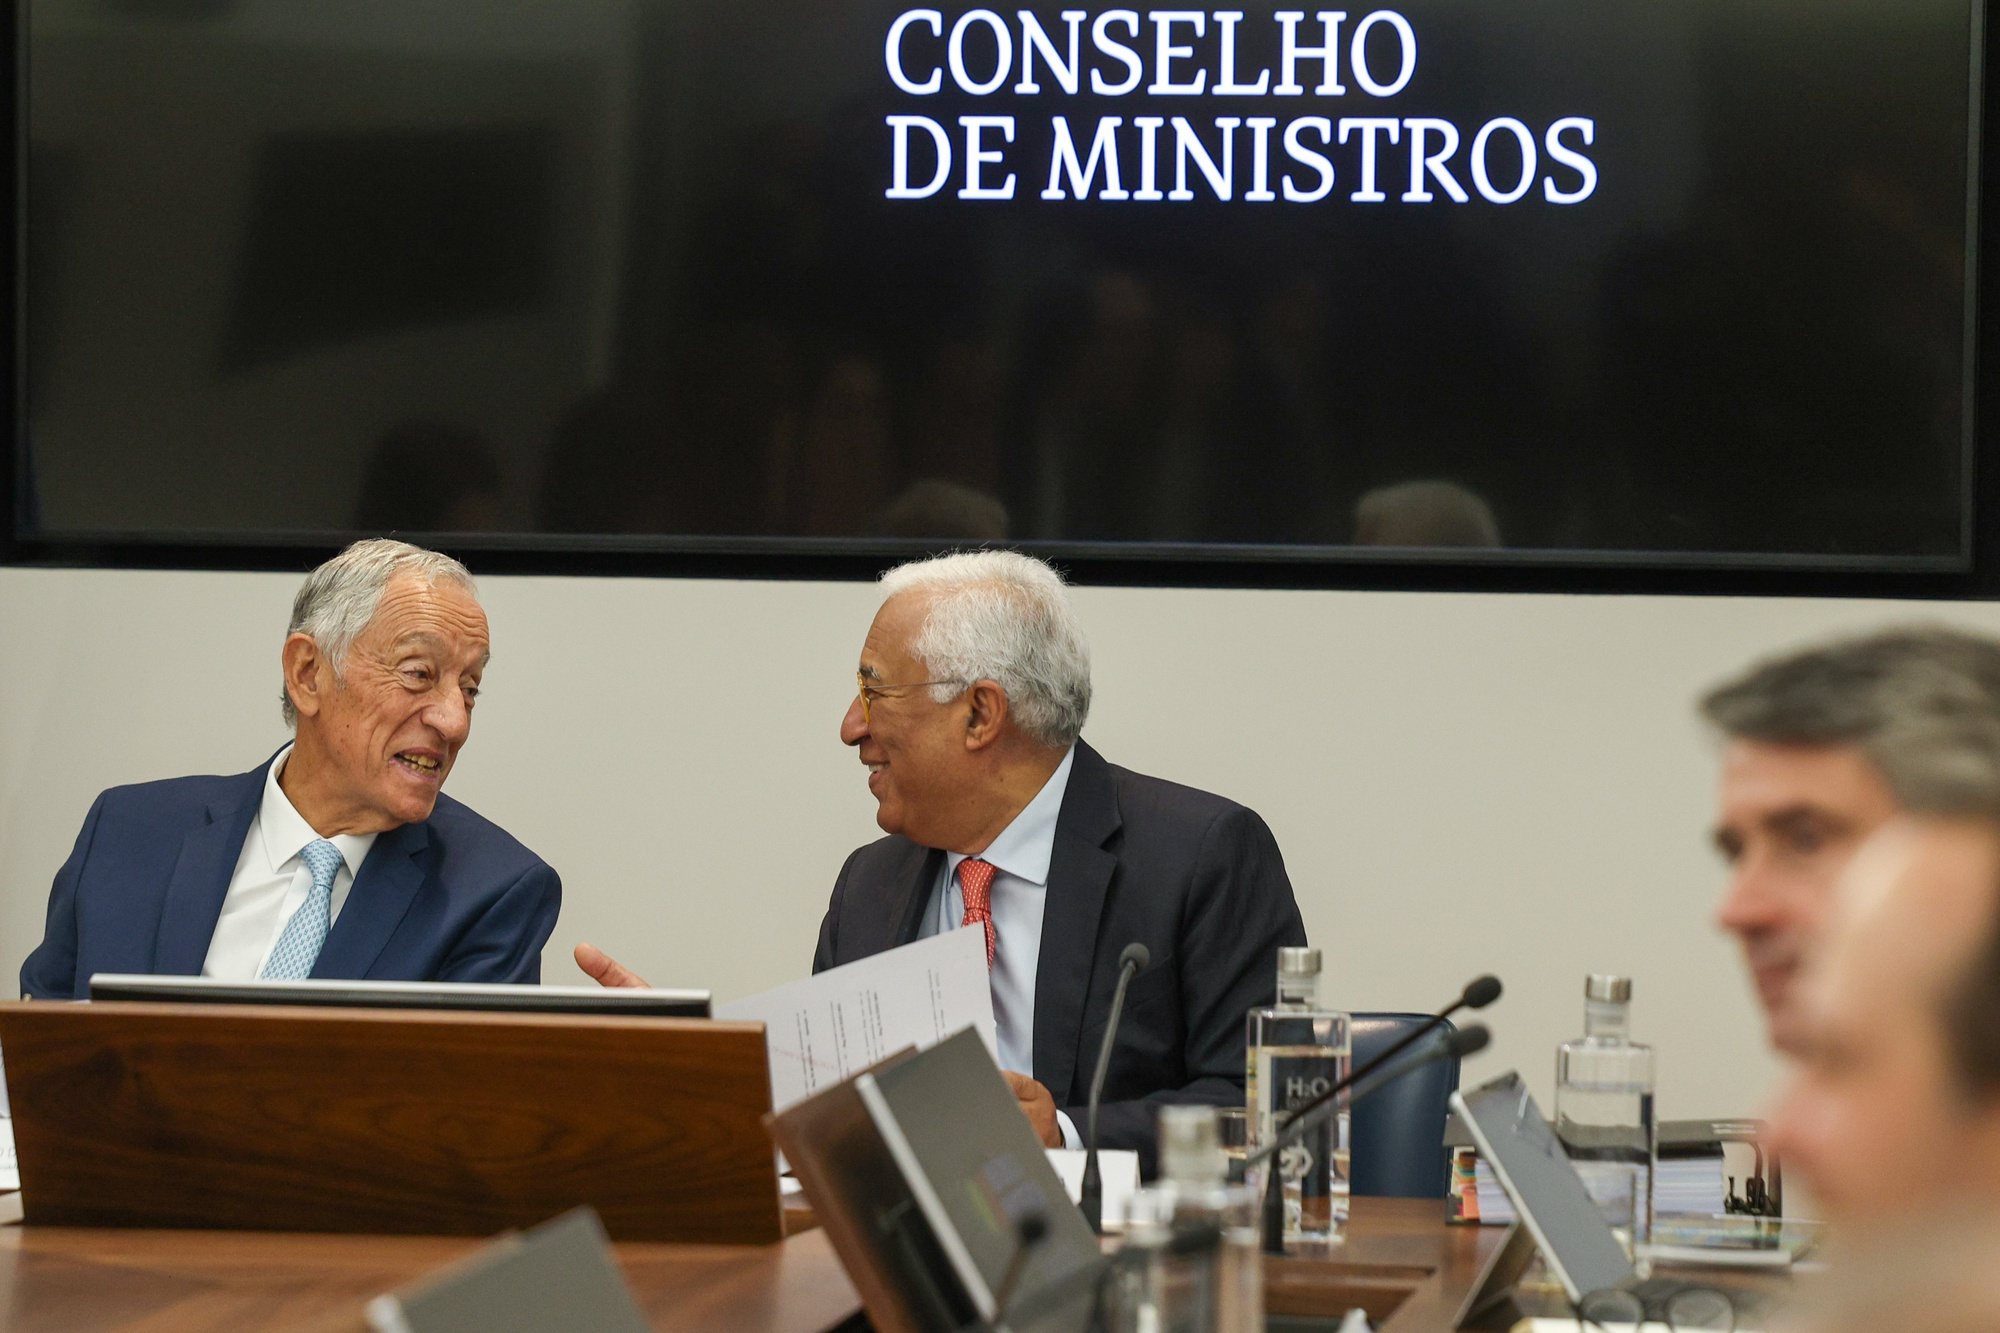 Portugal&#039;s President Marcelo Rebelo de Sousa (L) speaks with Prime Minister Antonio Costa (R), during the last meeting of the Council of Ministers of the XXIII Constitutional Government, which for the first time is being held in the new Government building, the former headquarters of Caixa Geral de Depositos (CGD), in Lisbon, Portugal, 25 March 2024. The Council of Ministers of the government led by Antonio Costa is meeting for the last time today and will be chaired by the head of state, with the PRR&#039;s state of play being one of the topics on the agenda. TIAGO PETINGA/LUSA